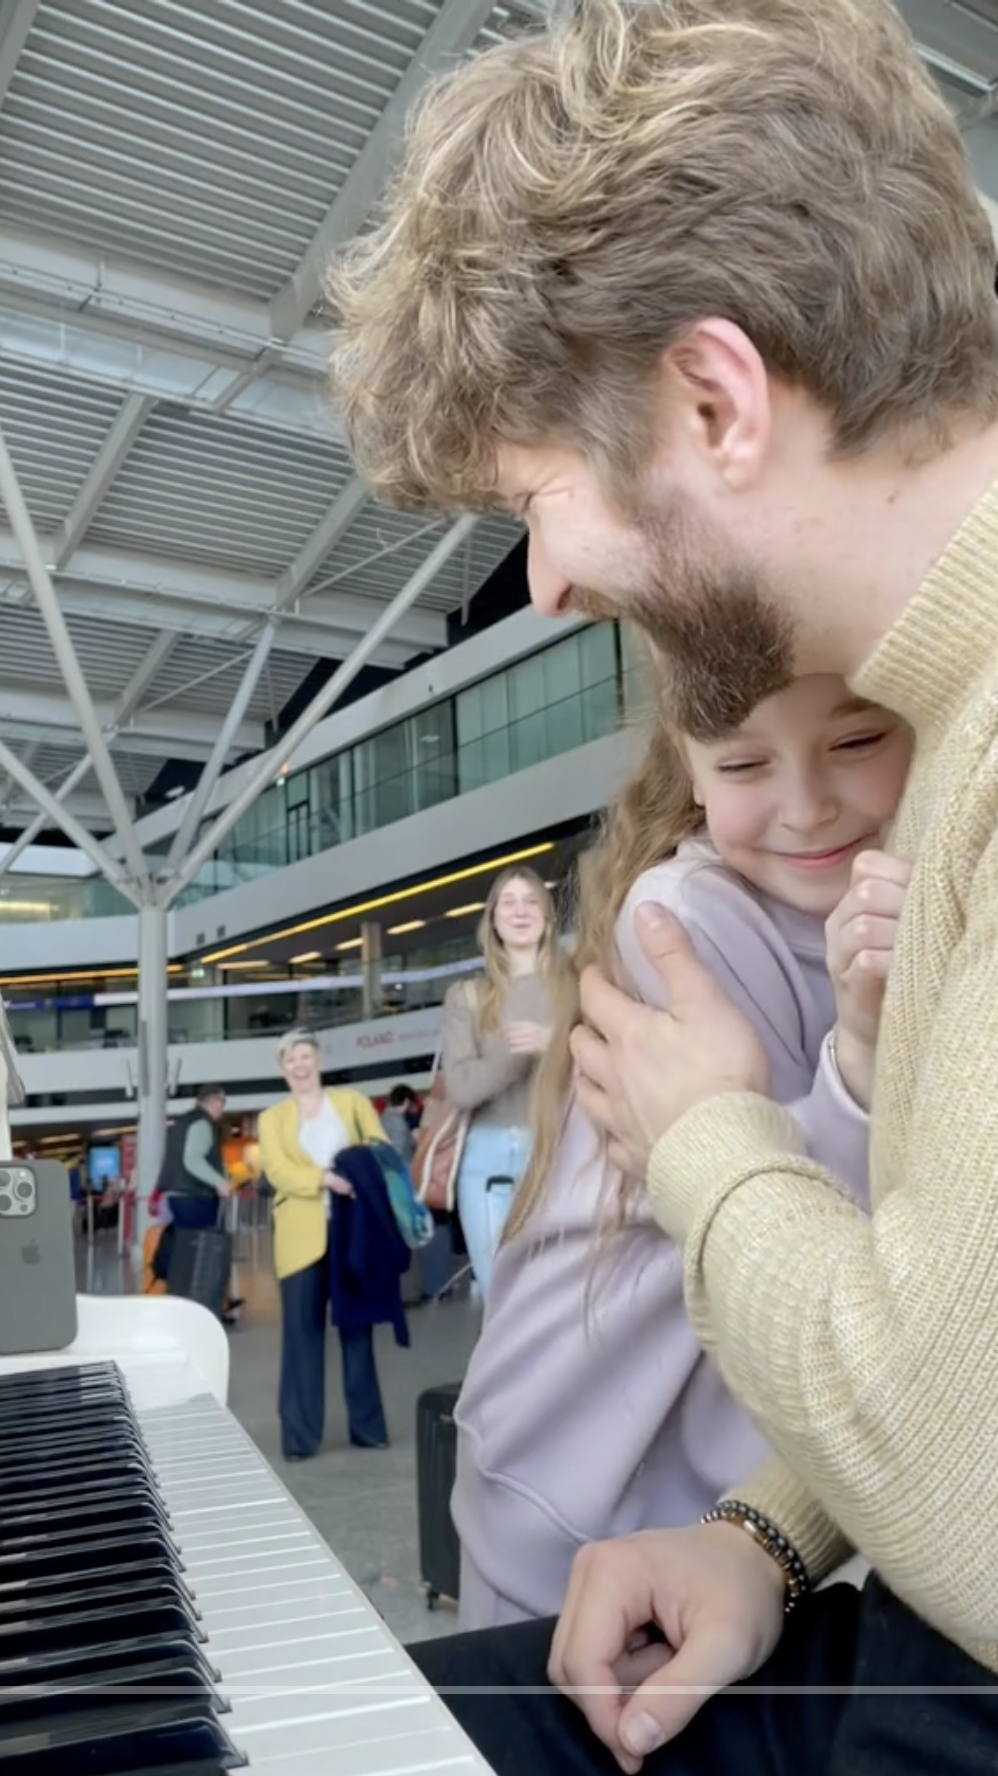 This video will make you cry: a little refugee sings Let it go at a Polish airport in Ukrainian, going viral